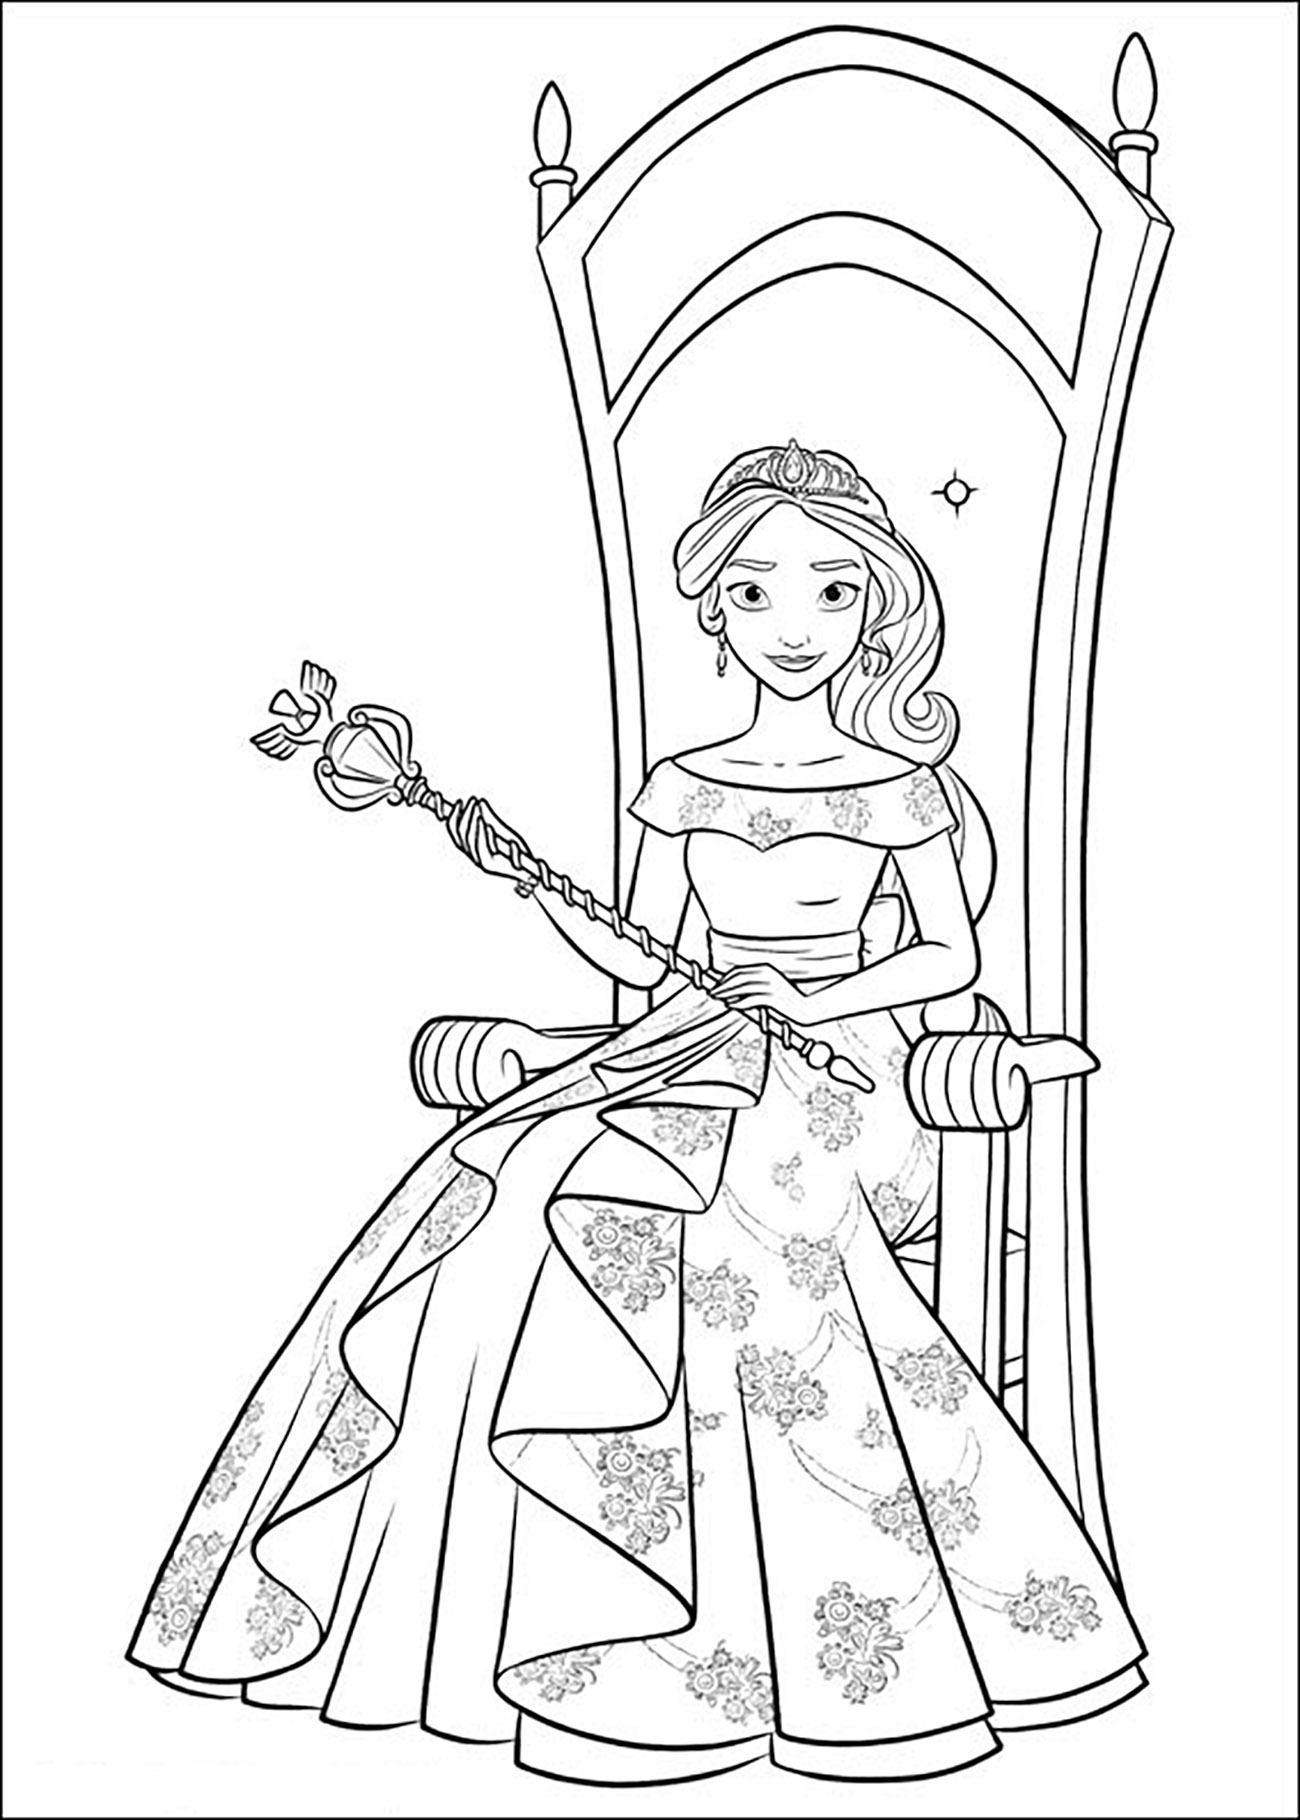 Disney Elena Of Avalon Coloring Pages